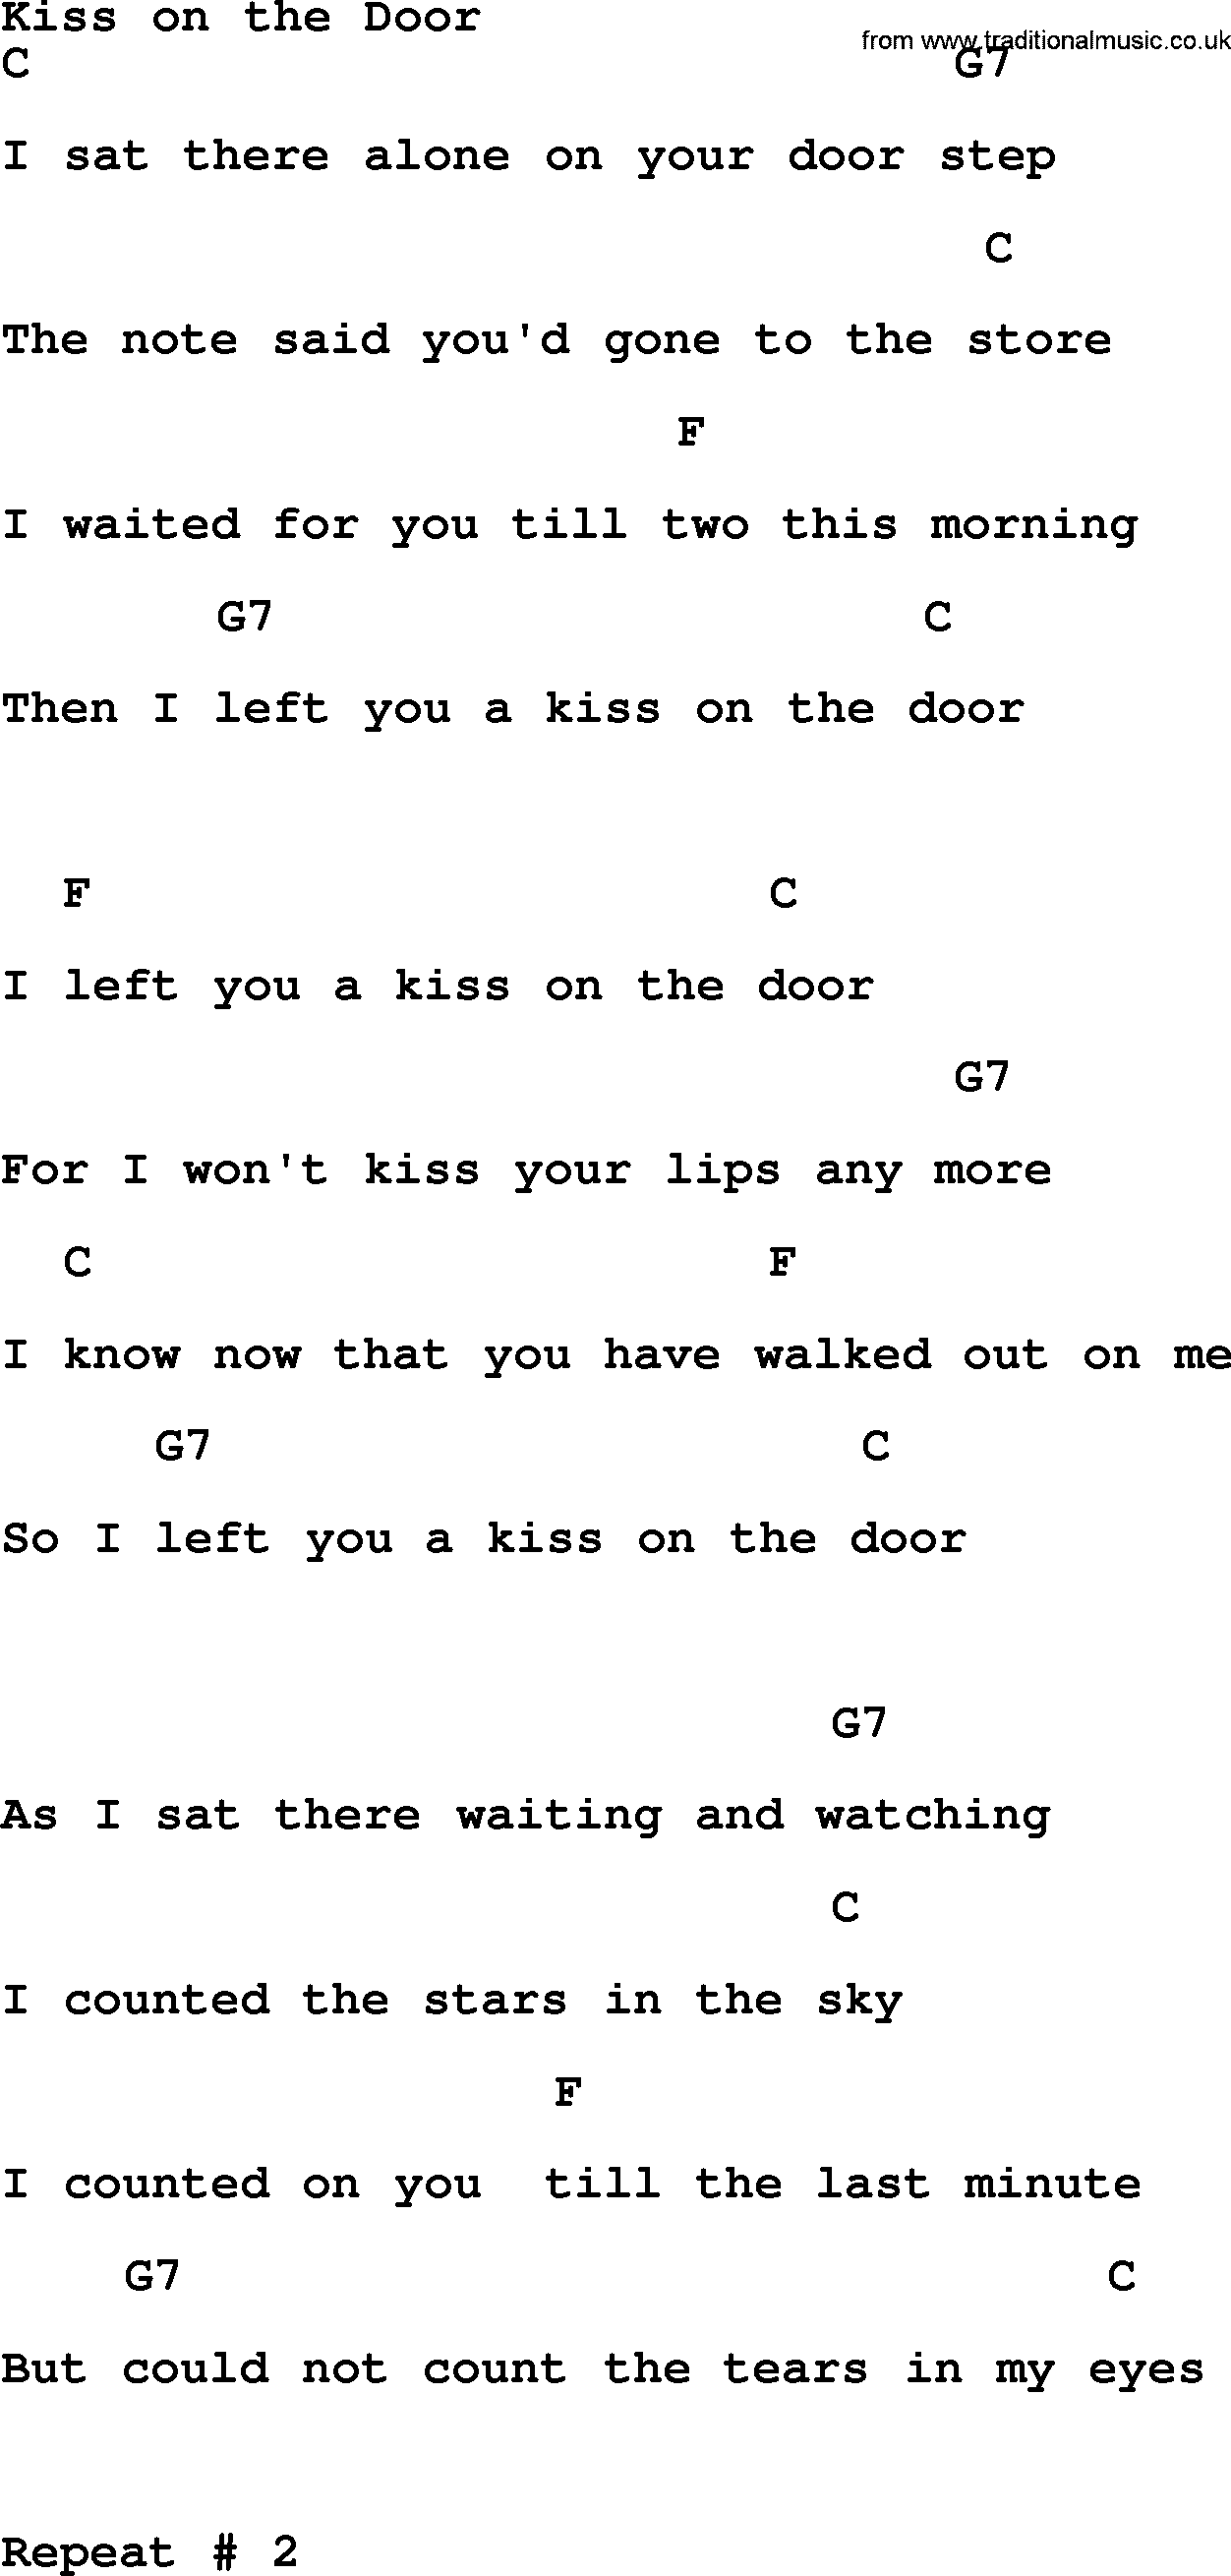 Bluegrass song: Kiss On The Door, lyrics and chords